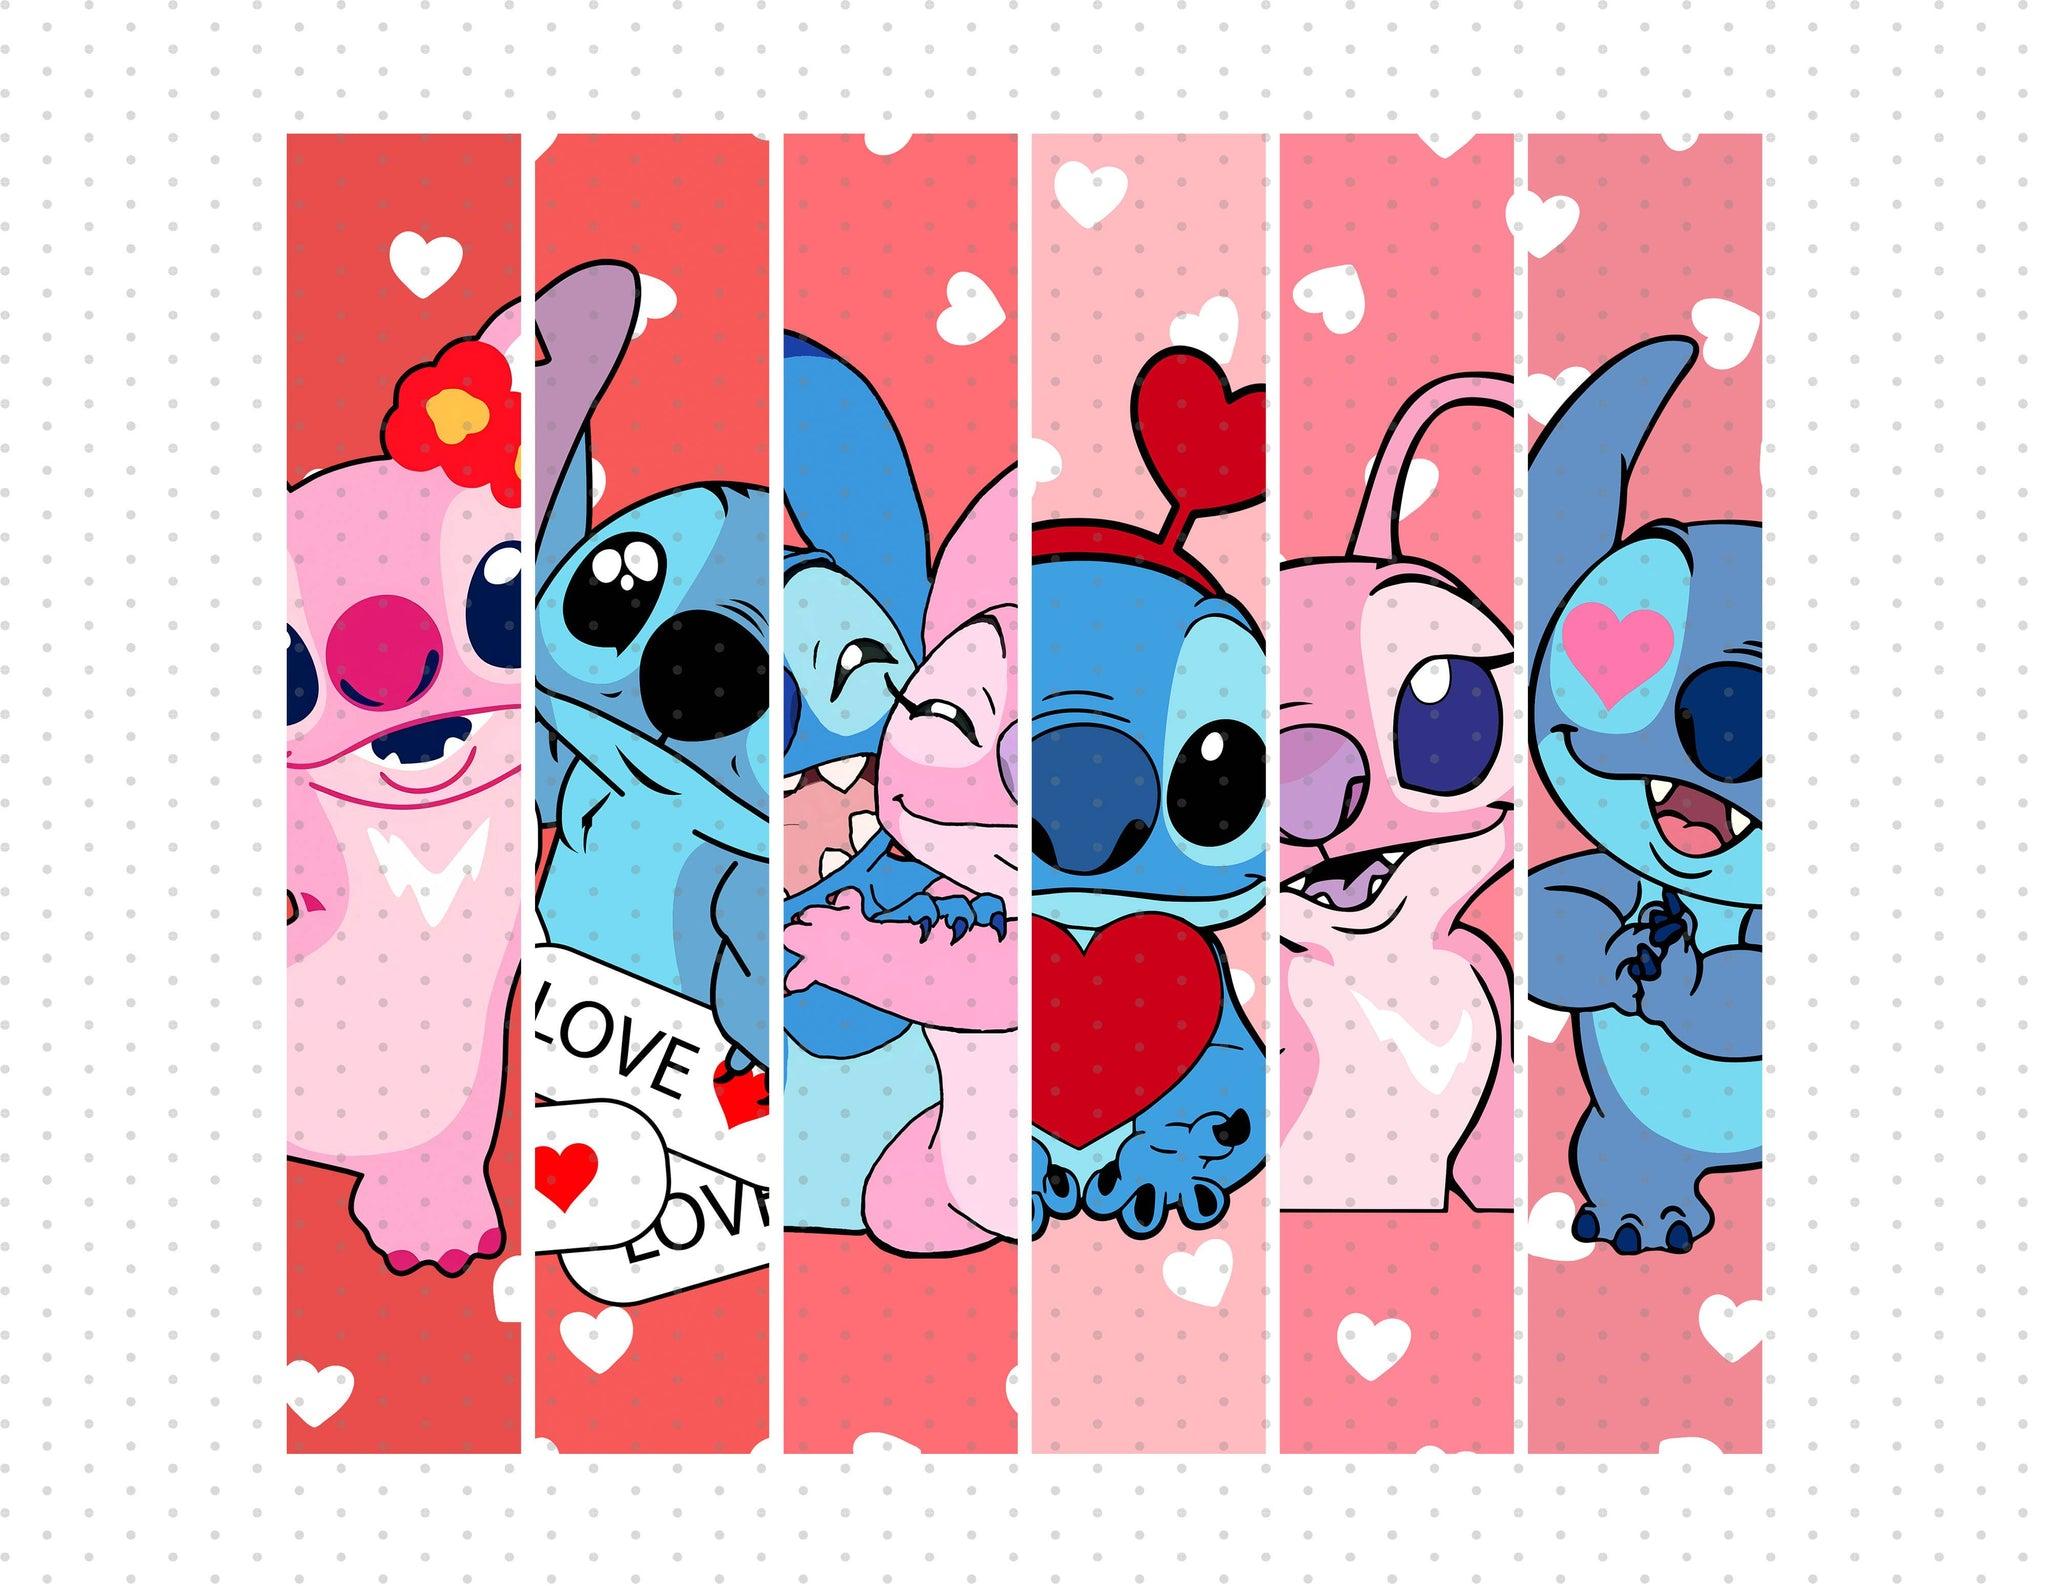 Valentine Lilo and Angel Iron on Transfer Decal